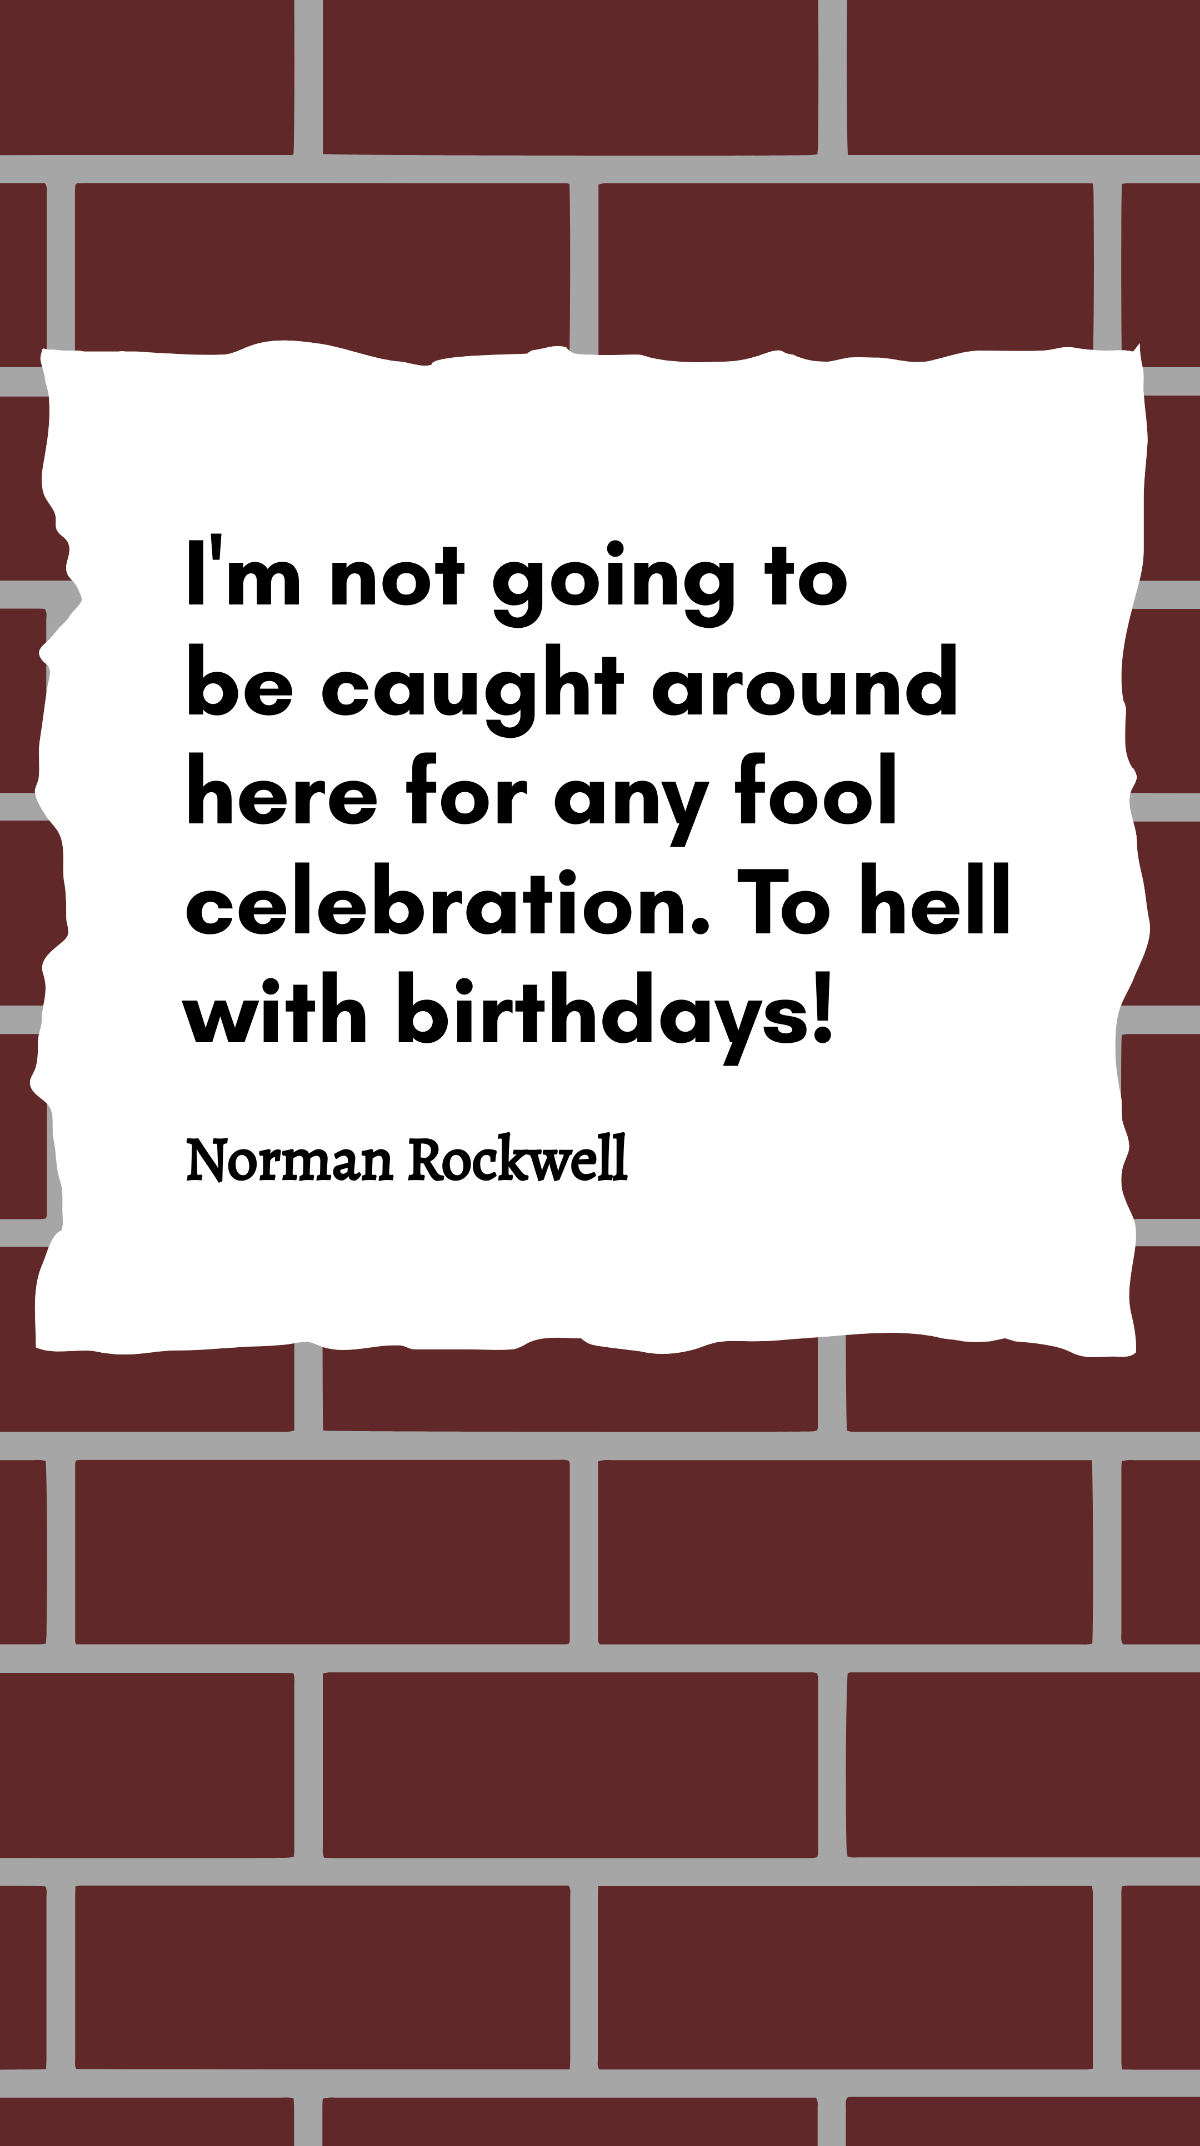 Norman Rockwell - I'm not going to be caught around here for any fool celebration. To hell with birthdays! Template